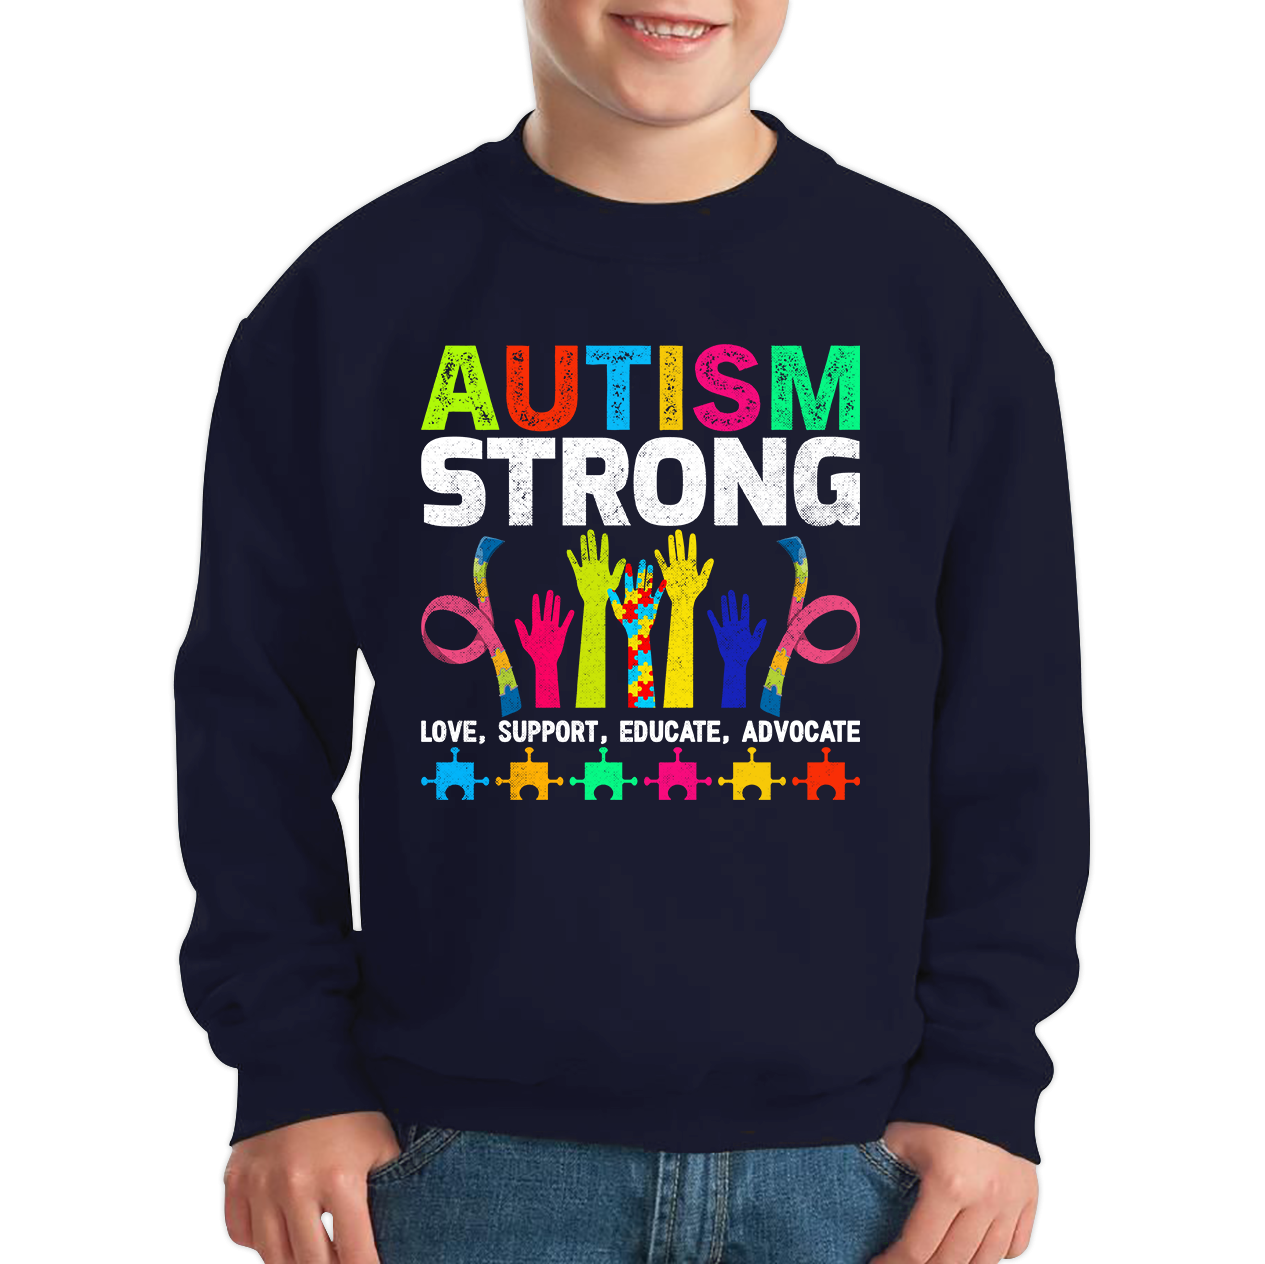 Autism Strong Love Support Educate Advocate Kids Sweatshirt